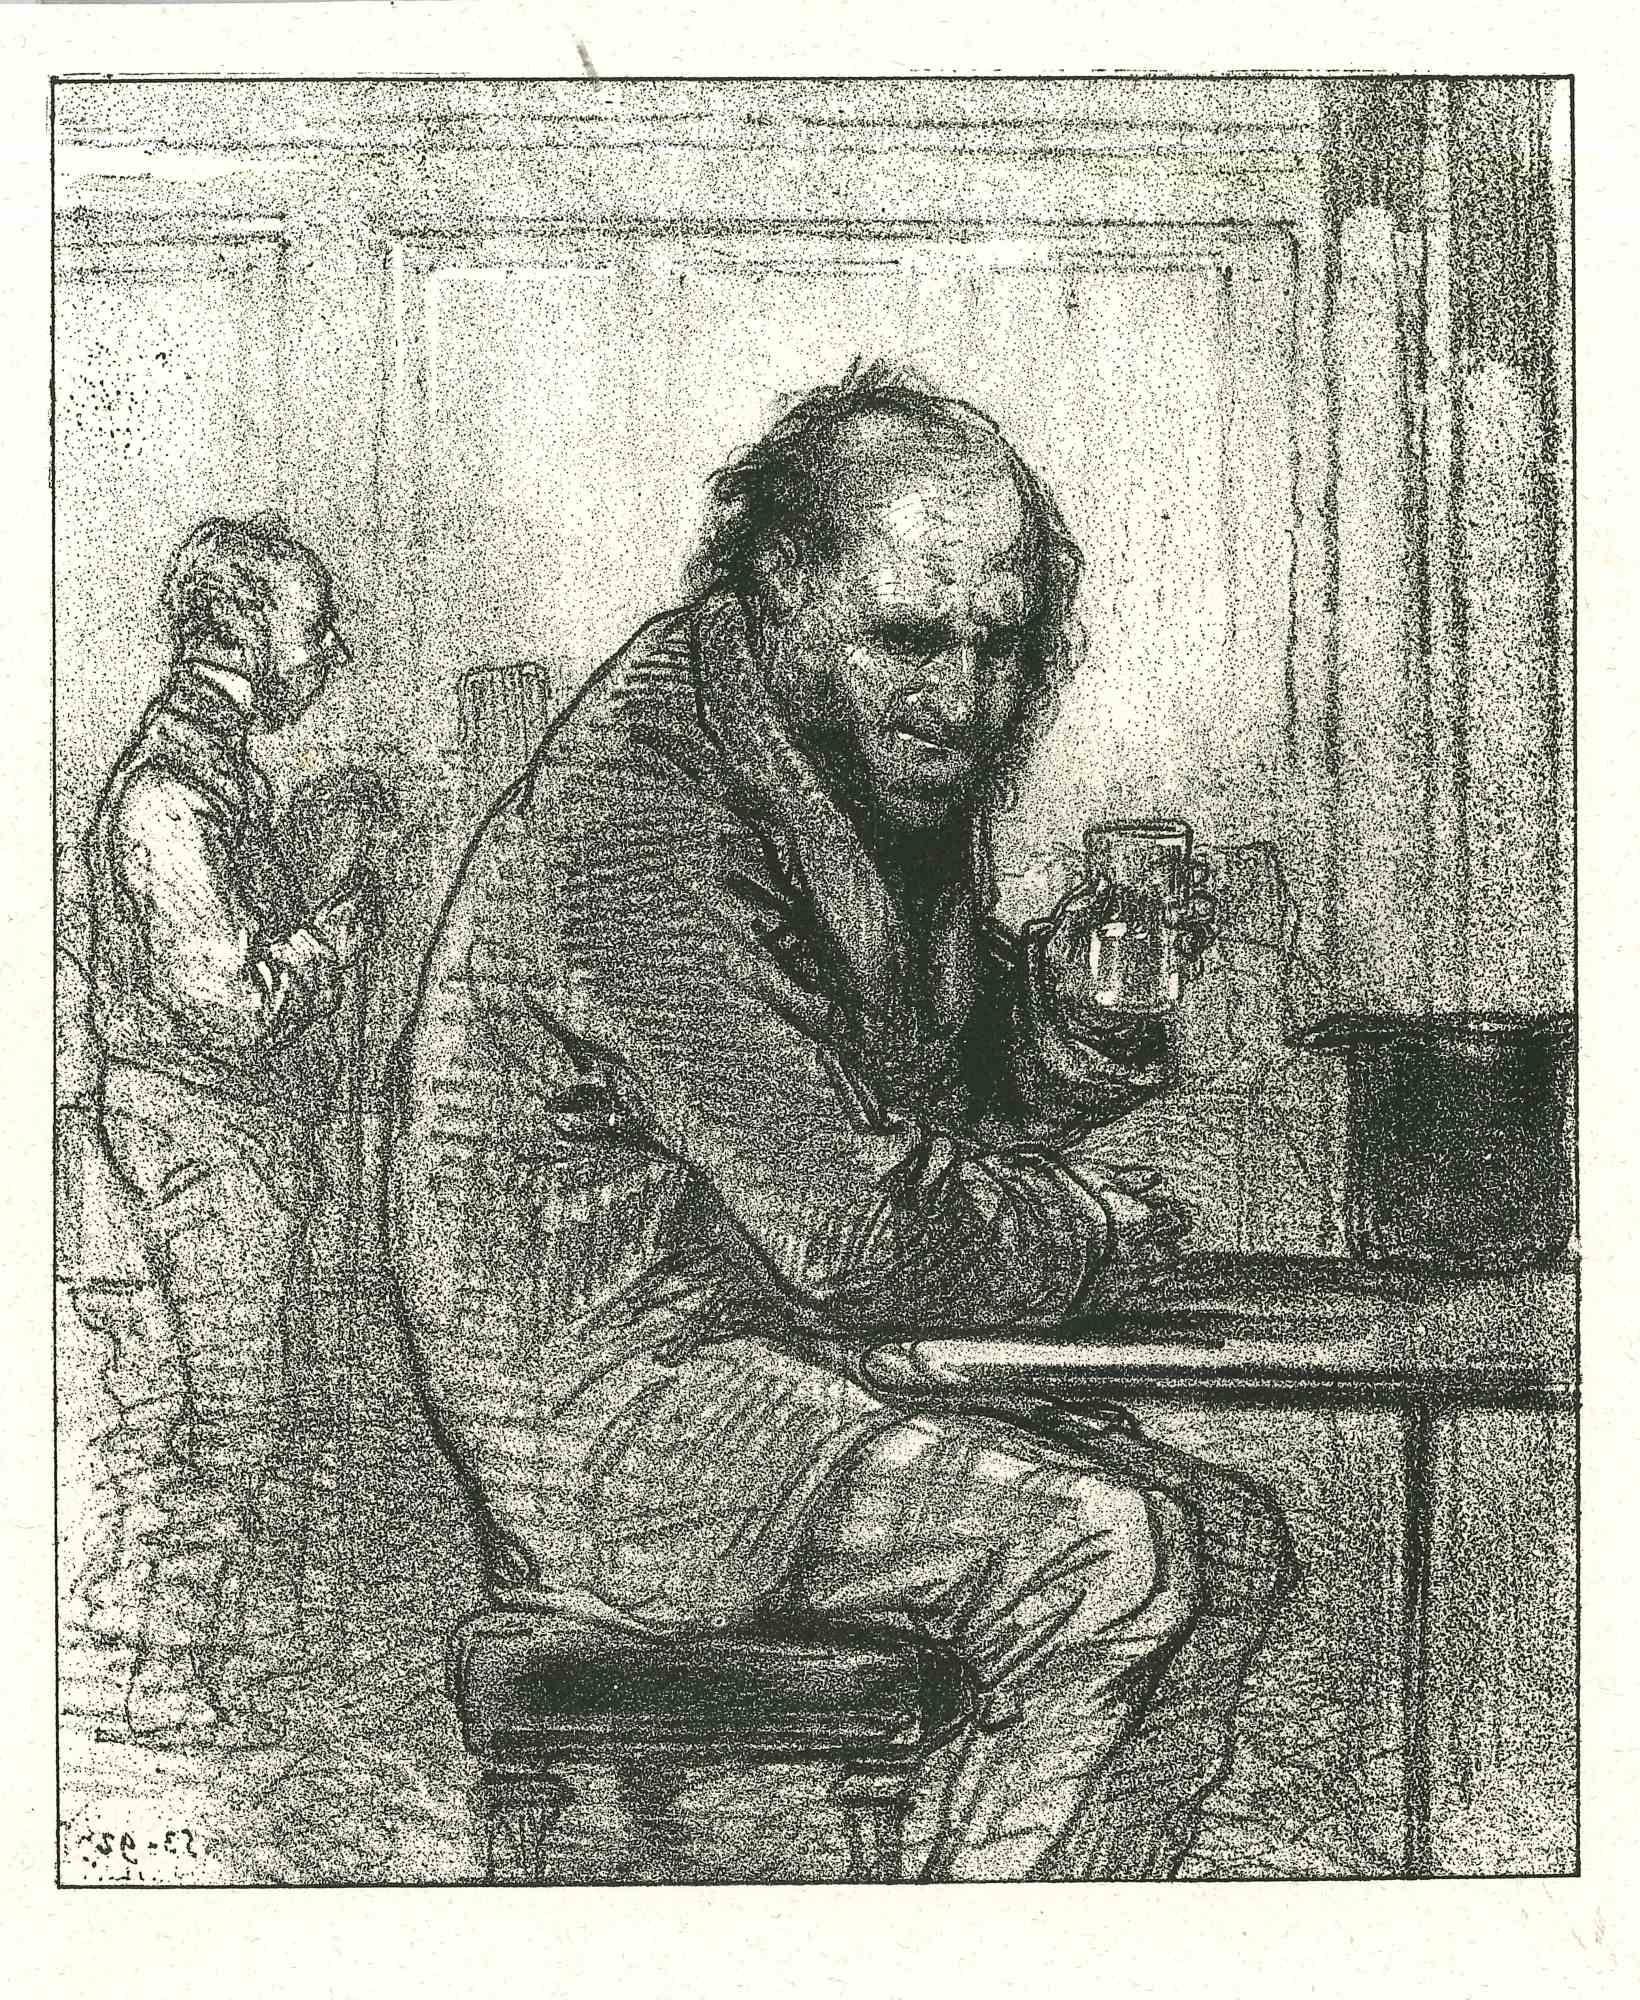 A Man with Whisky is an original lithograph artwork on ivory-colored paper, realized by the French draftsman Paul Gavarni (after) (alias Guillaume Sulpice Chevalier Gavarni, 1804-1866) in Paris, 1881, in the collection of Illustration for "La